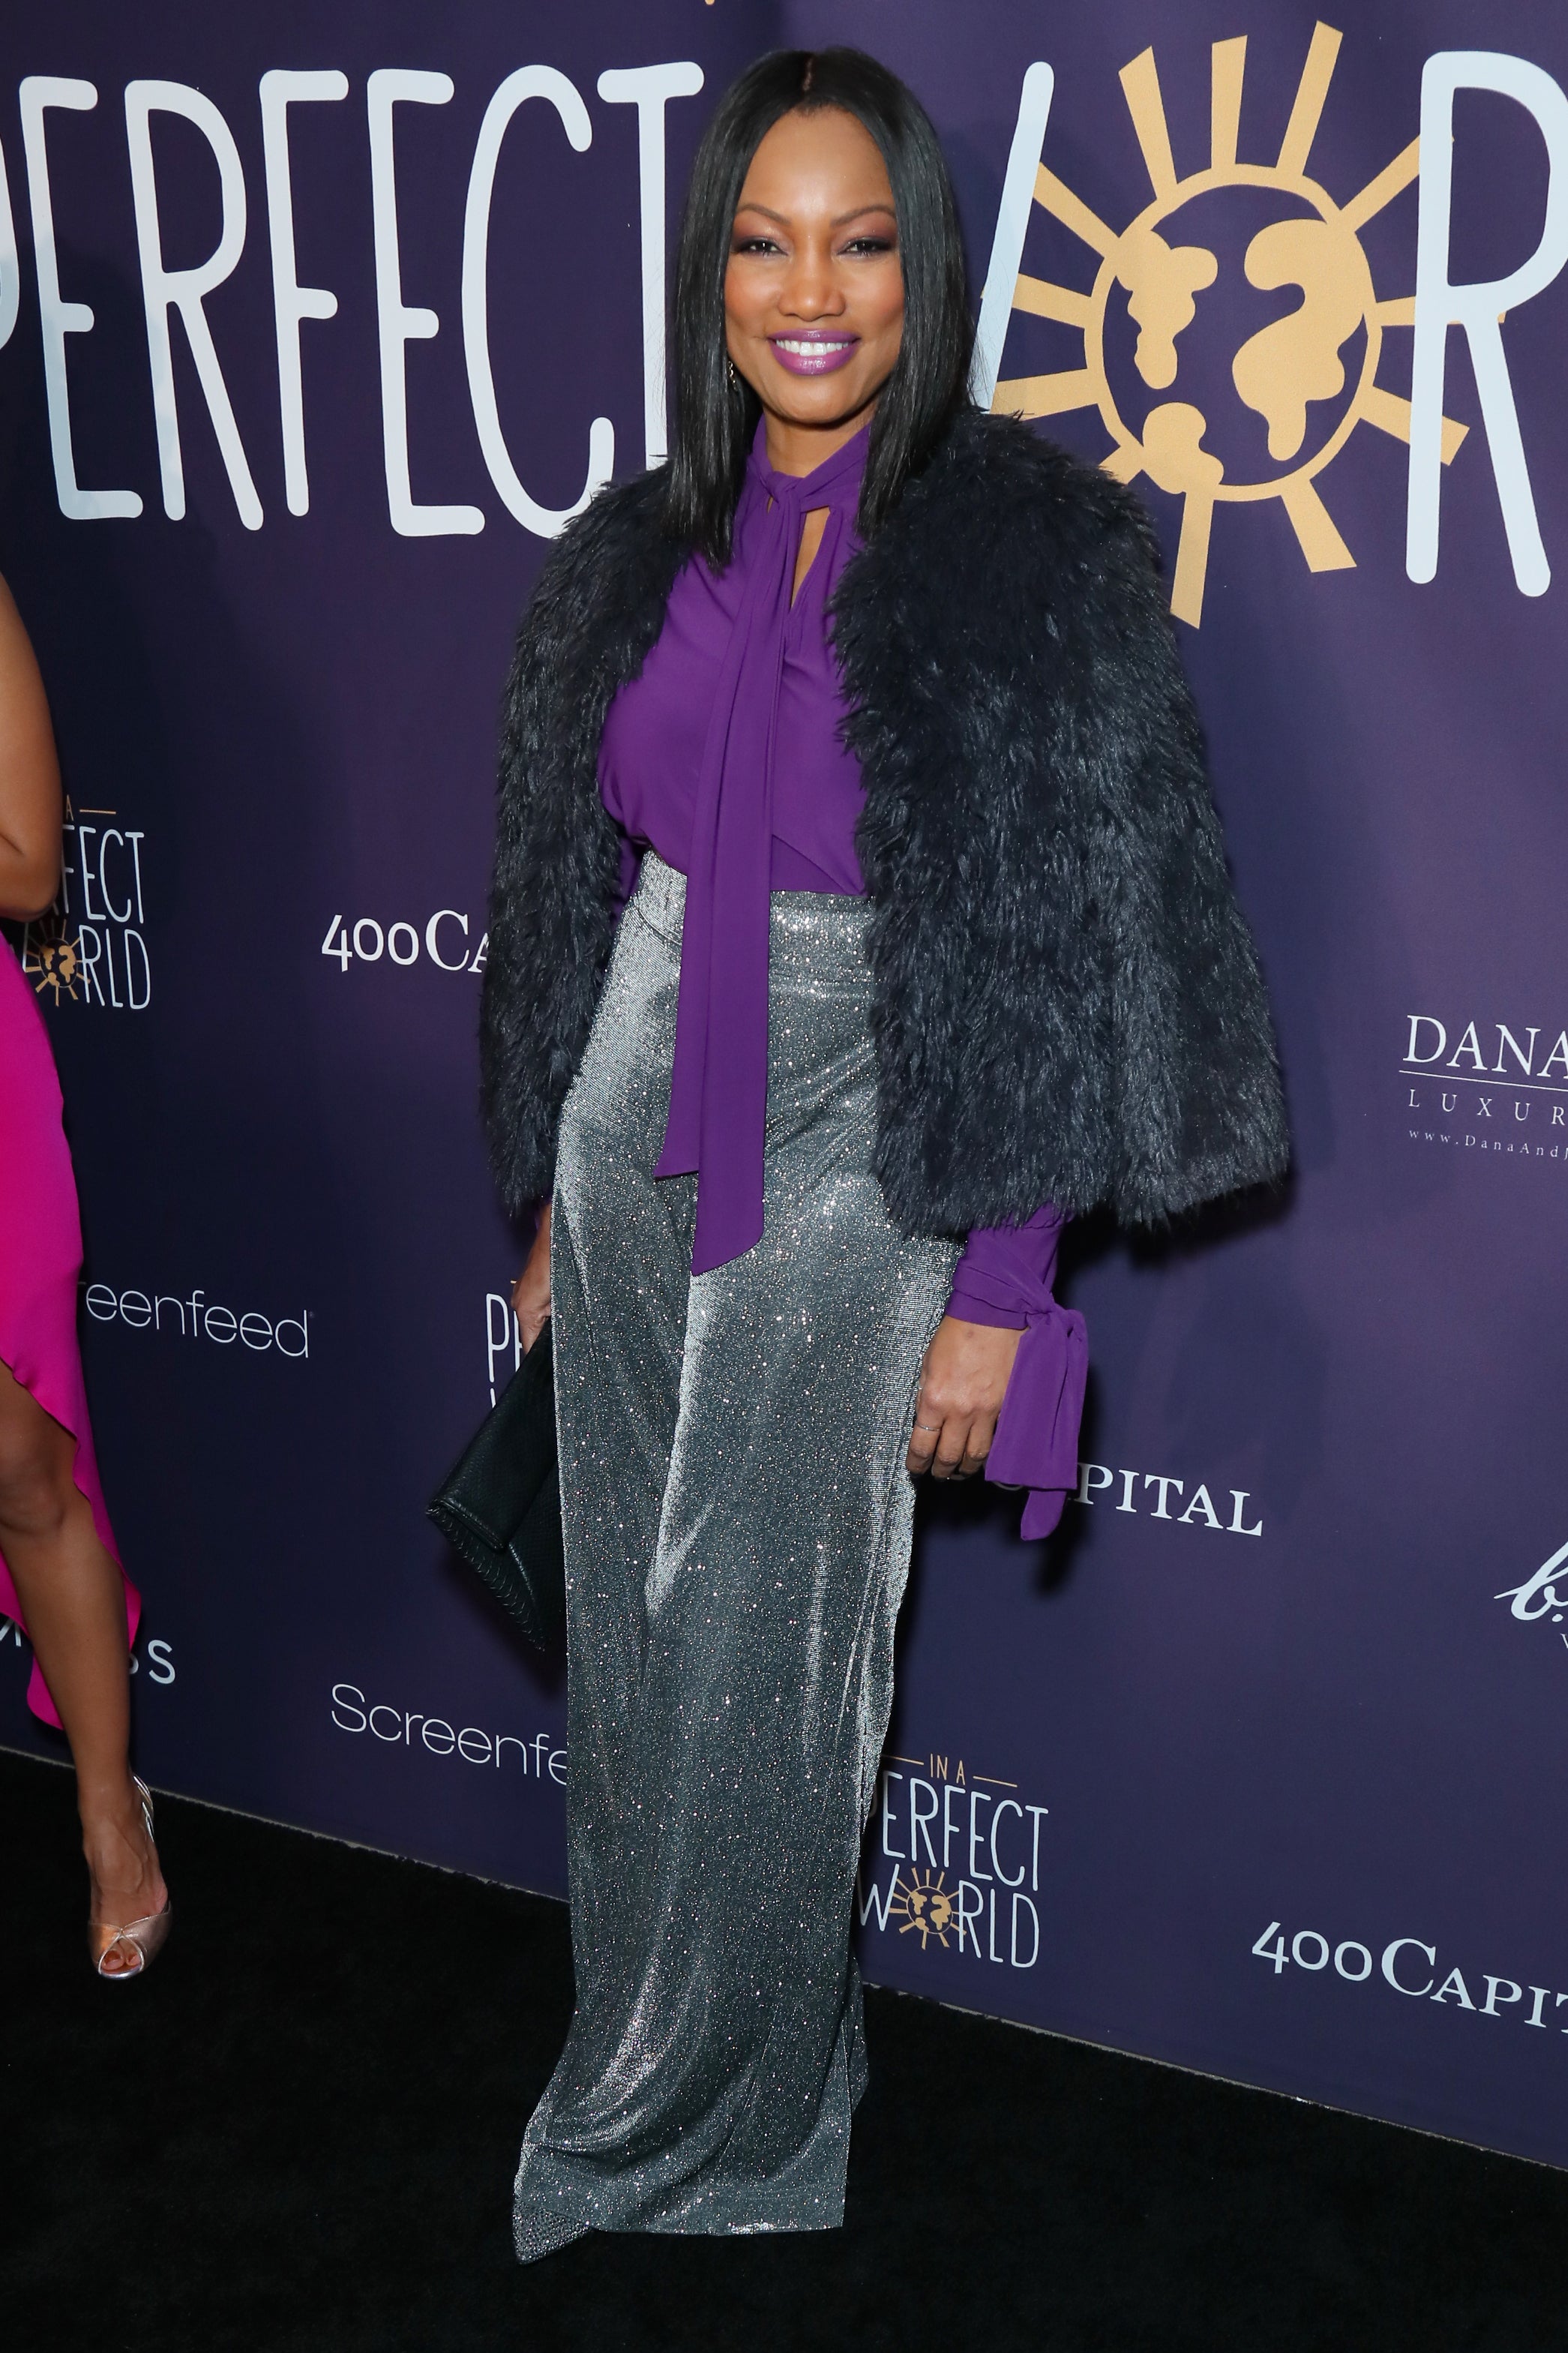 Ava DuVernay, Janelle Monae, Samuel L. Jackson And More Celebs Out And About